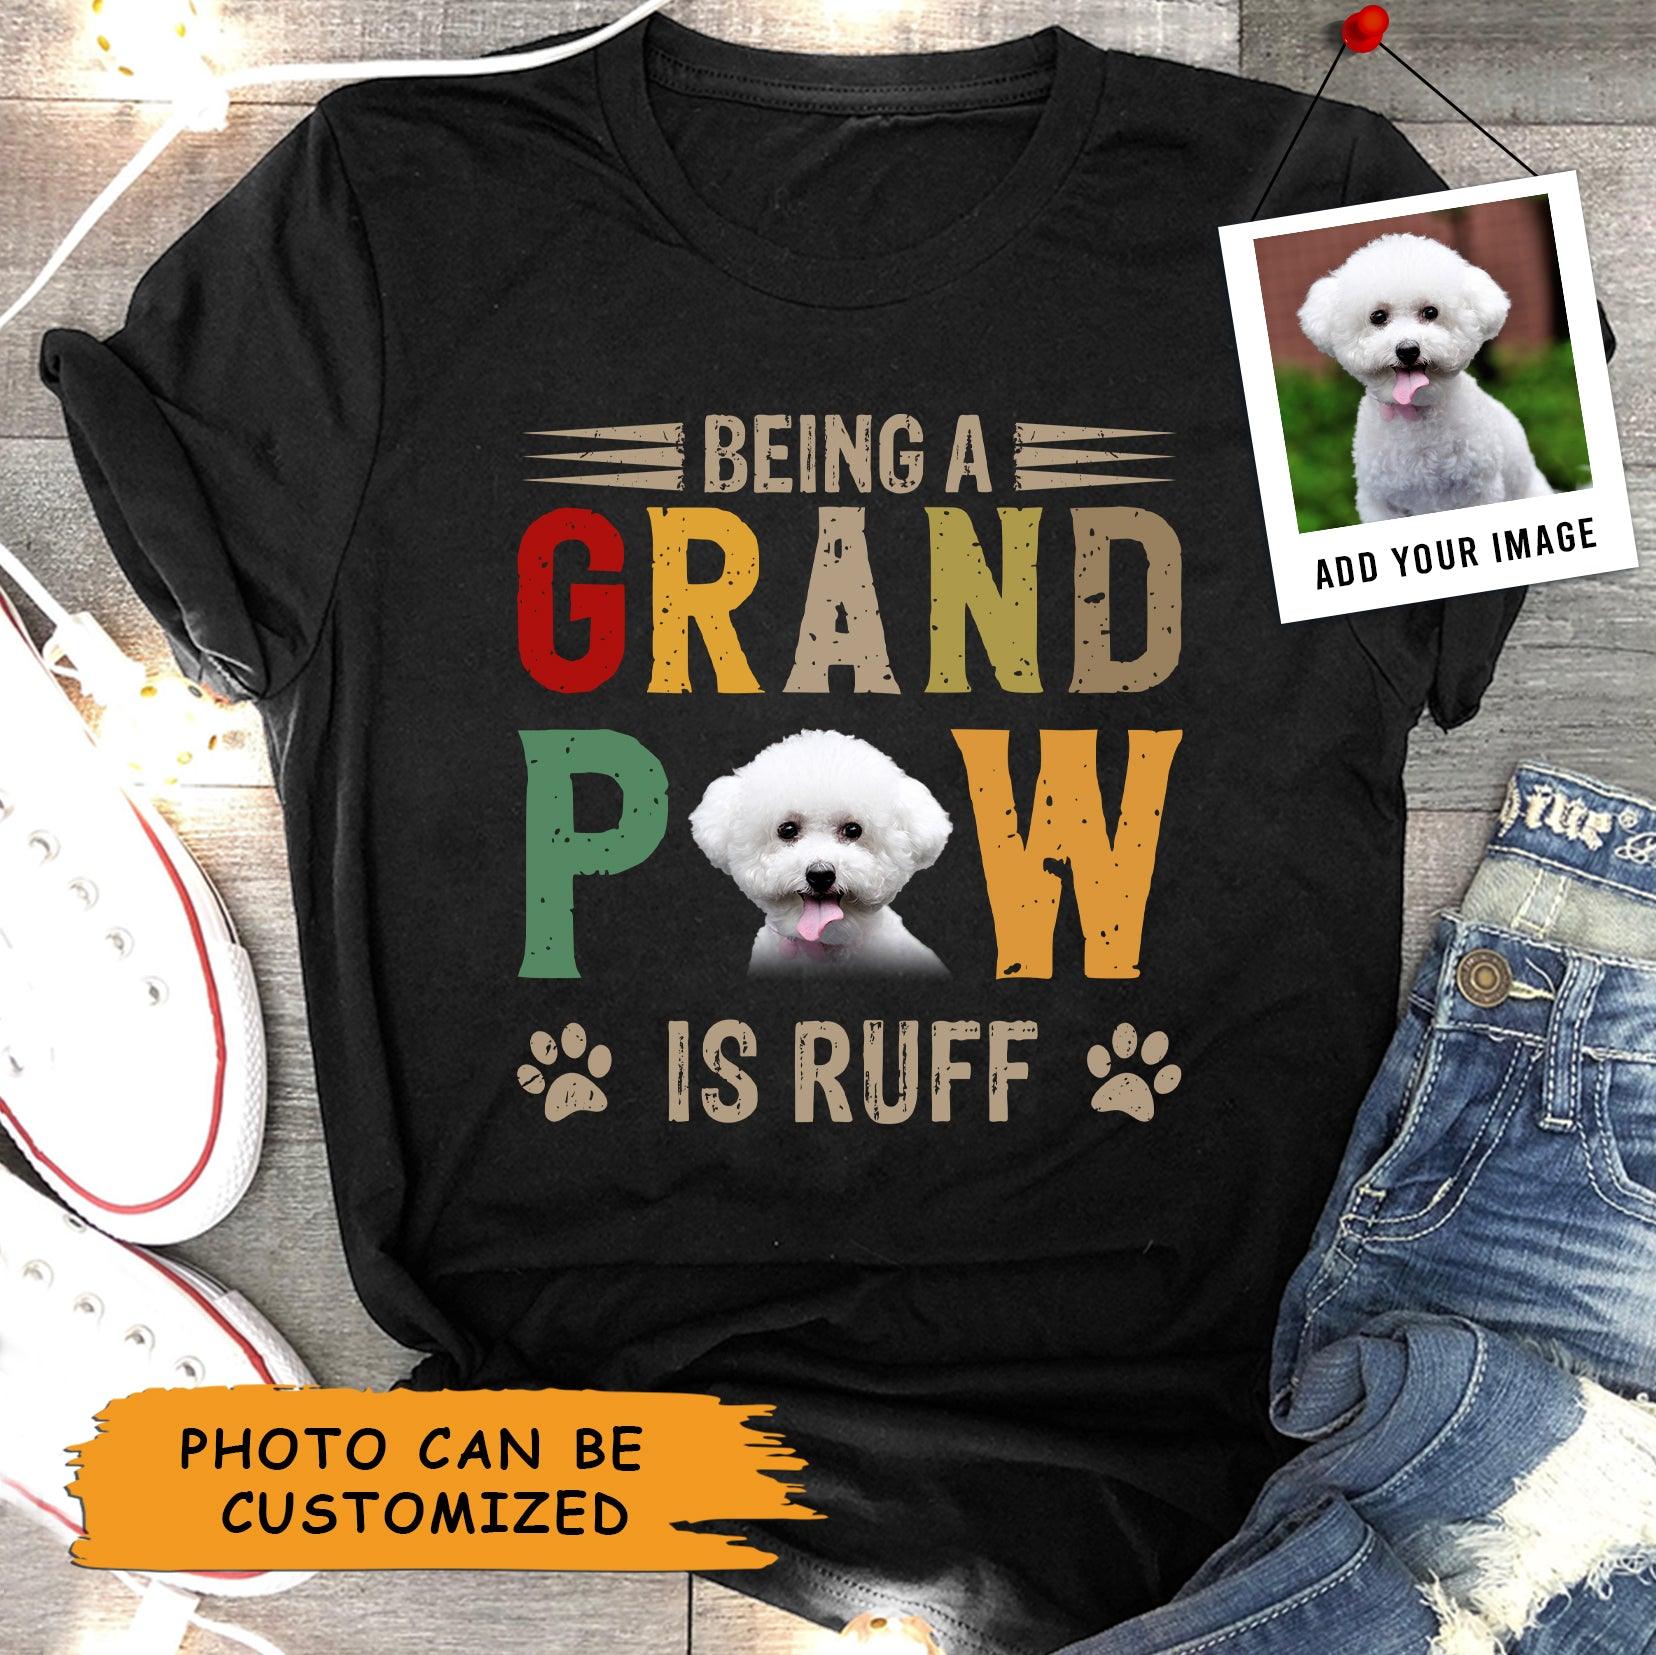 Bichon Frisé Dog Unisex T Shirt Custom - Customize Photo Being A Grand Paw Is Ruff Personalized Unisex T Shirt - Gift For Dog Lovers, Friend, Family - Amzanimalsgift